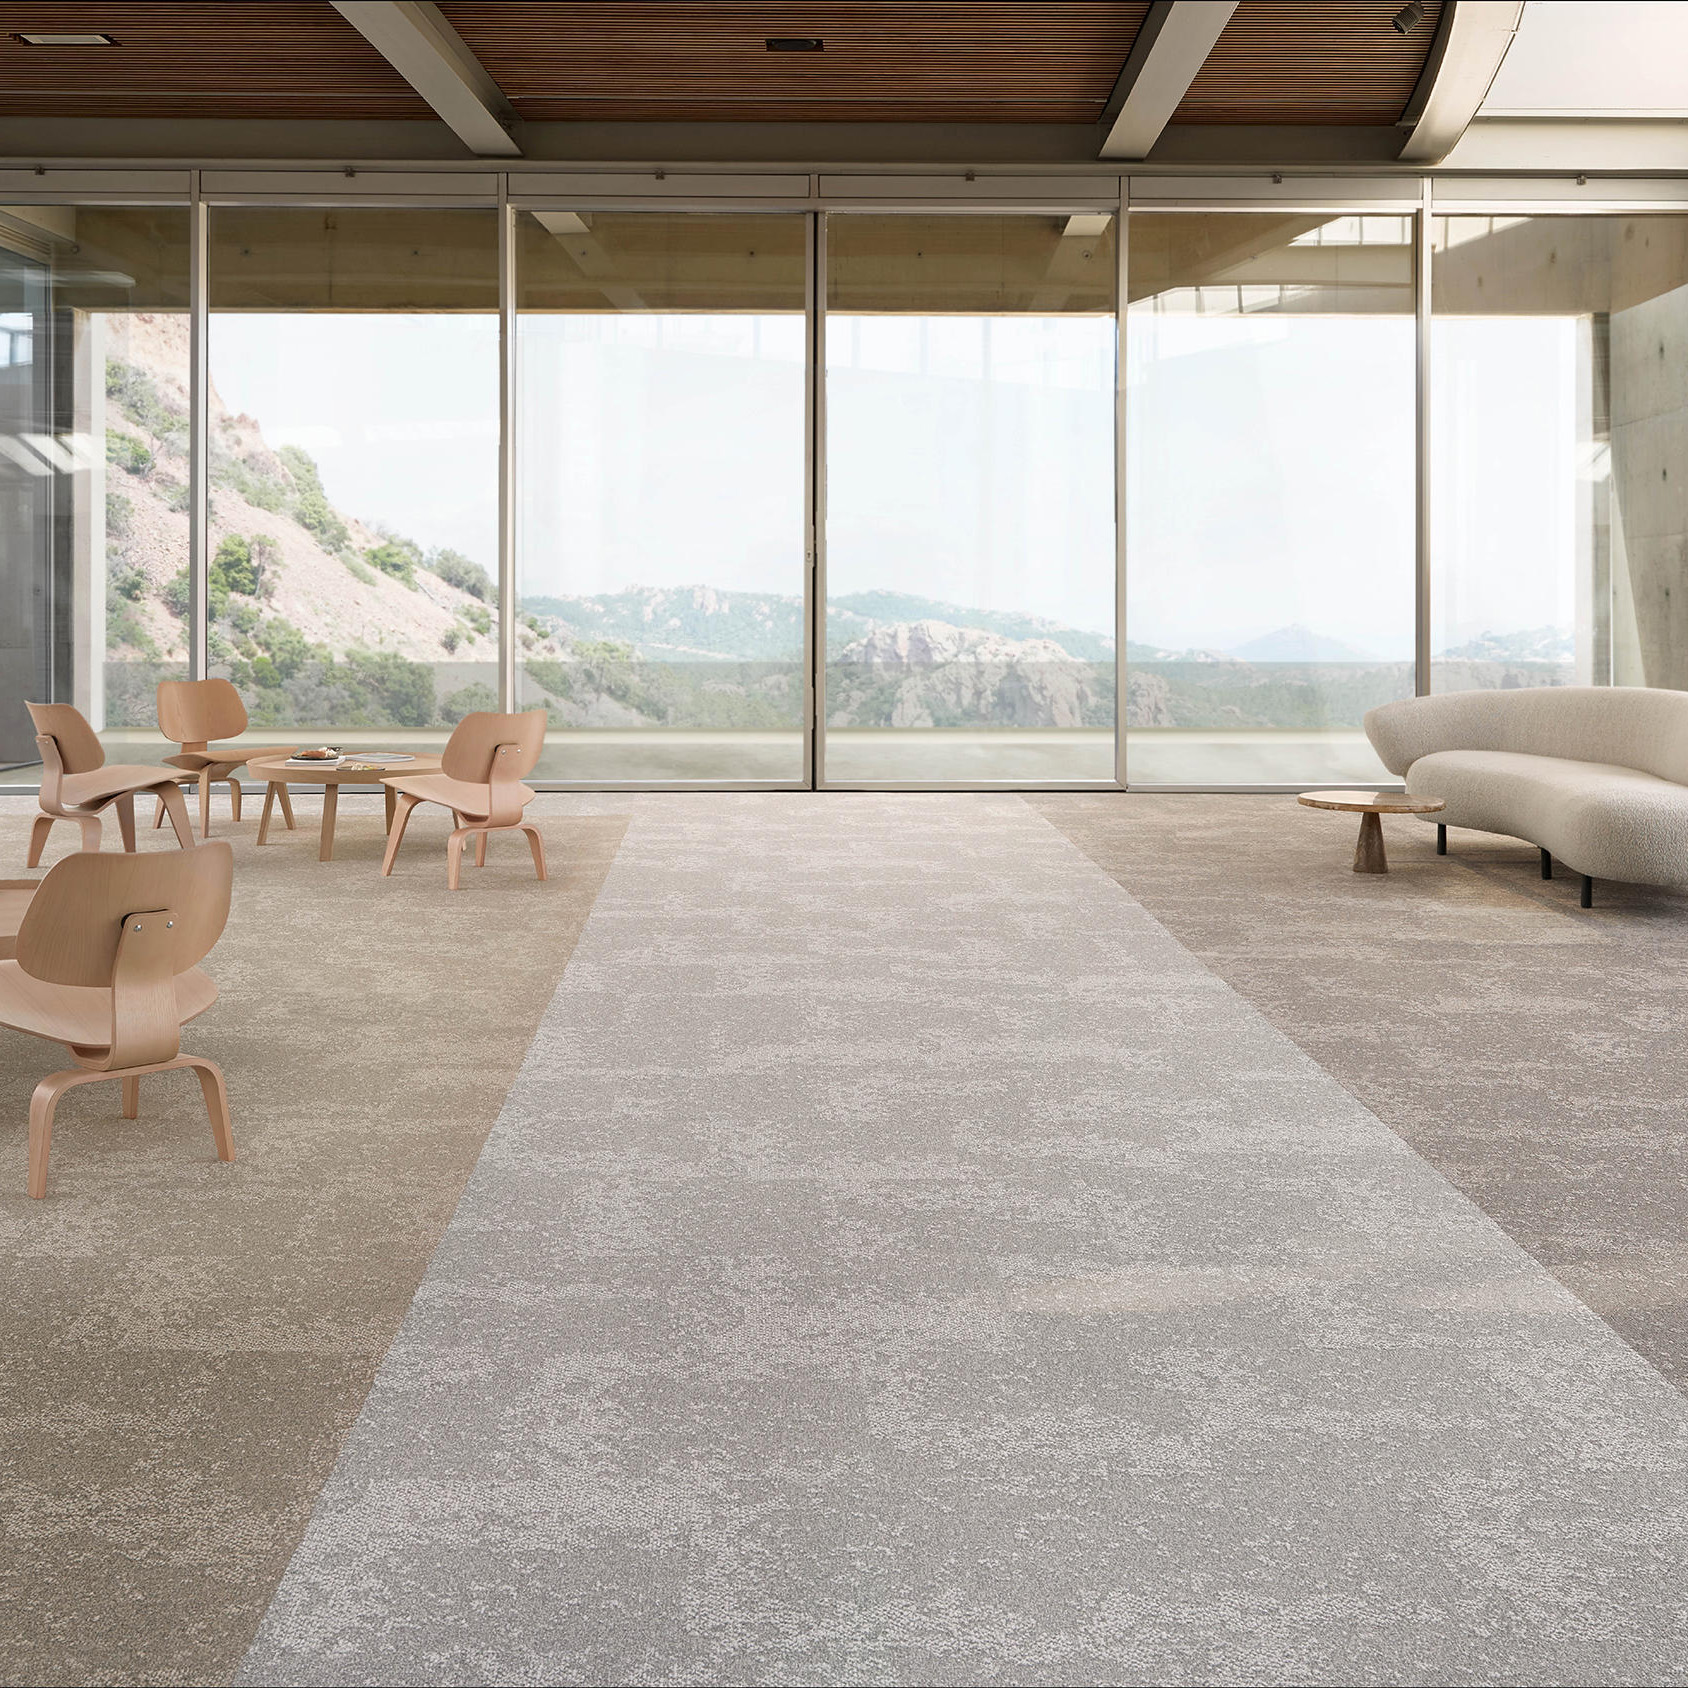 Desso Arable Carpet Tile used in open commercial setting